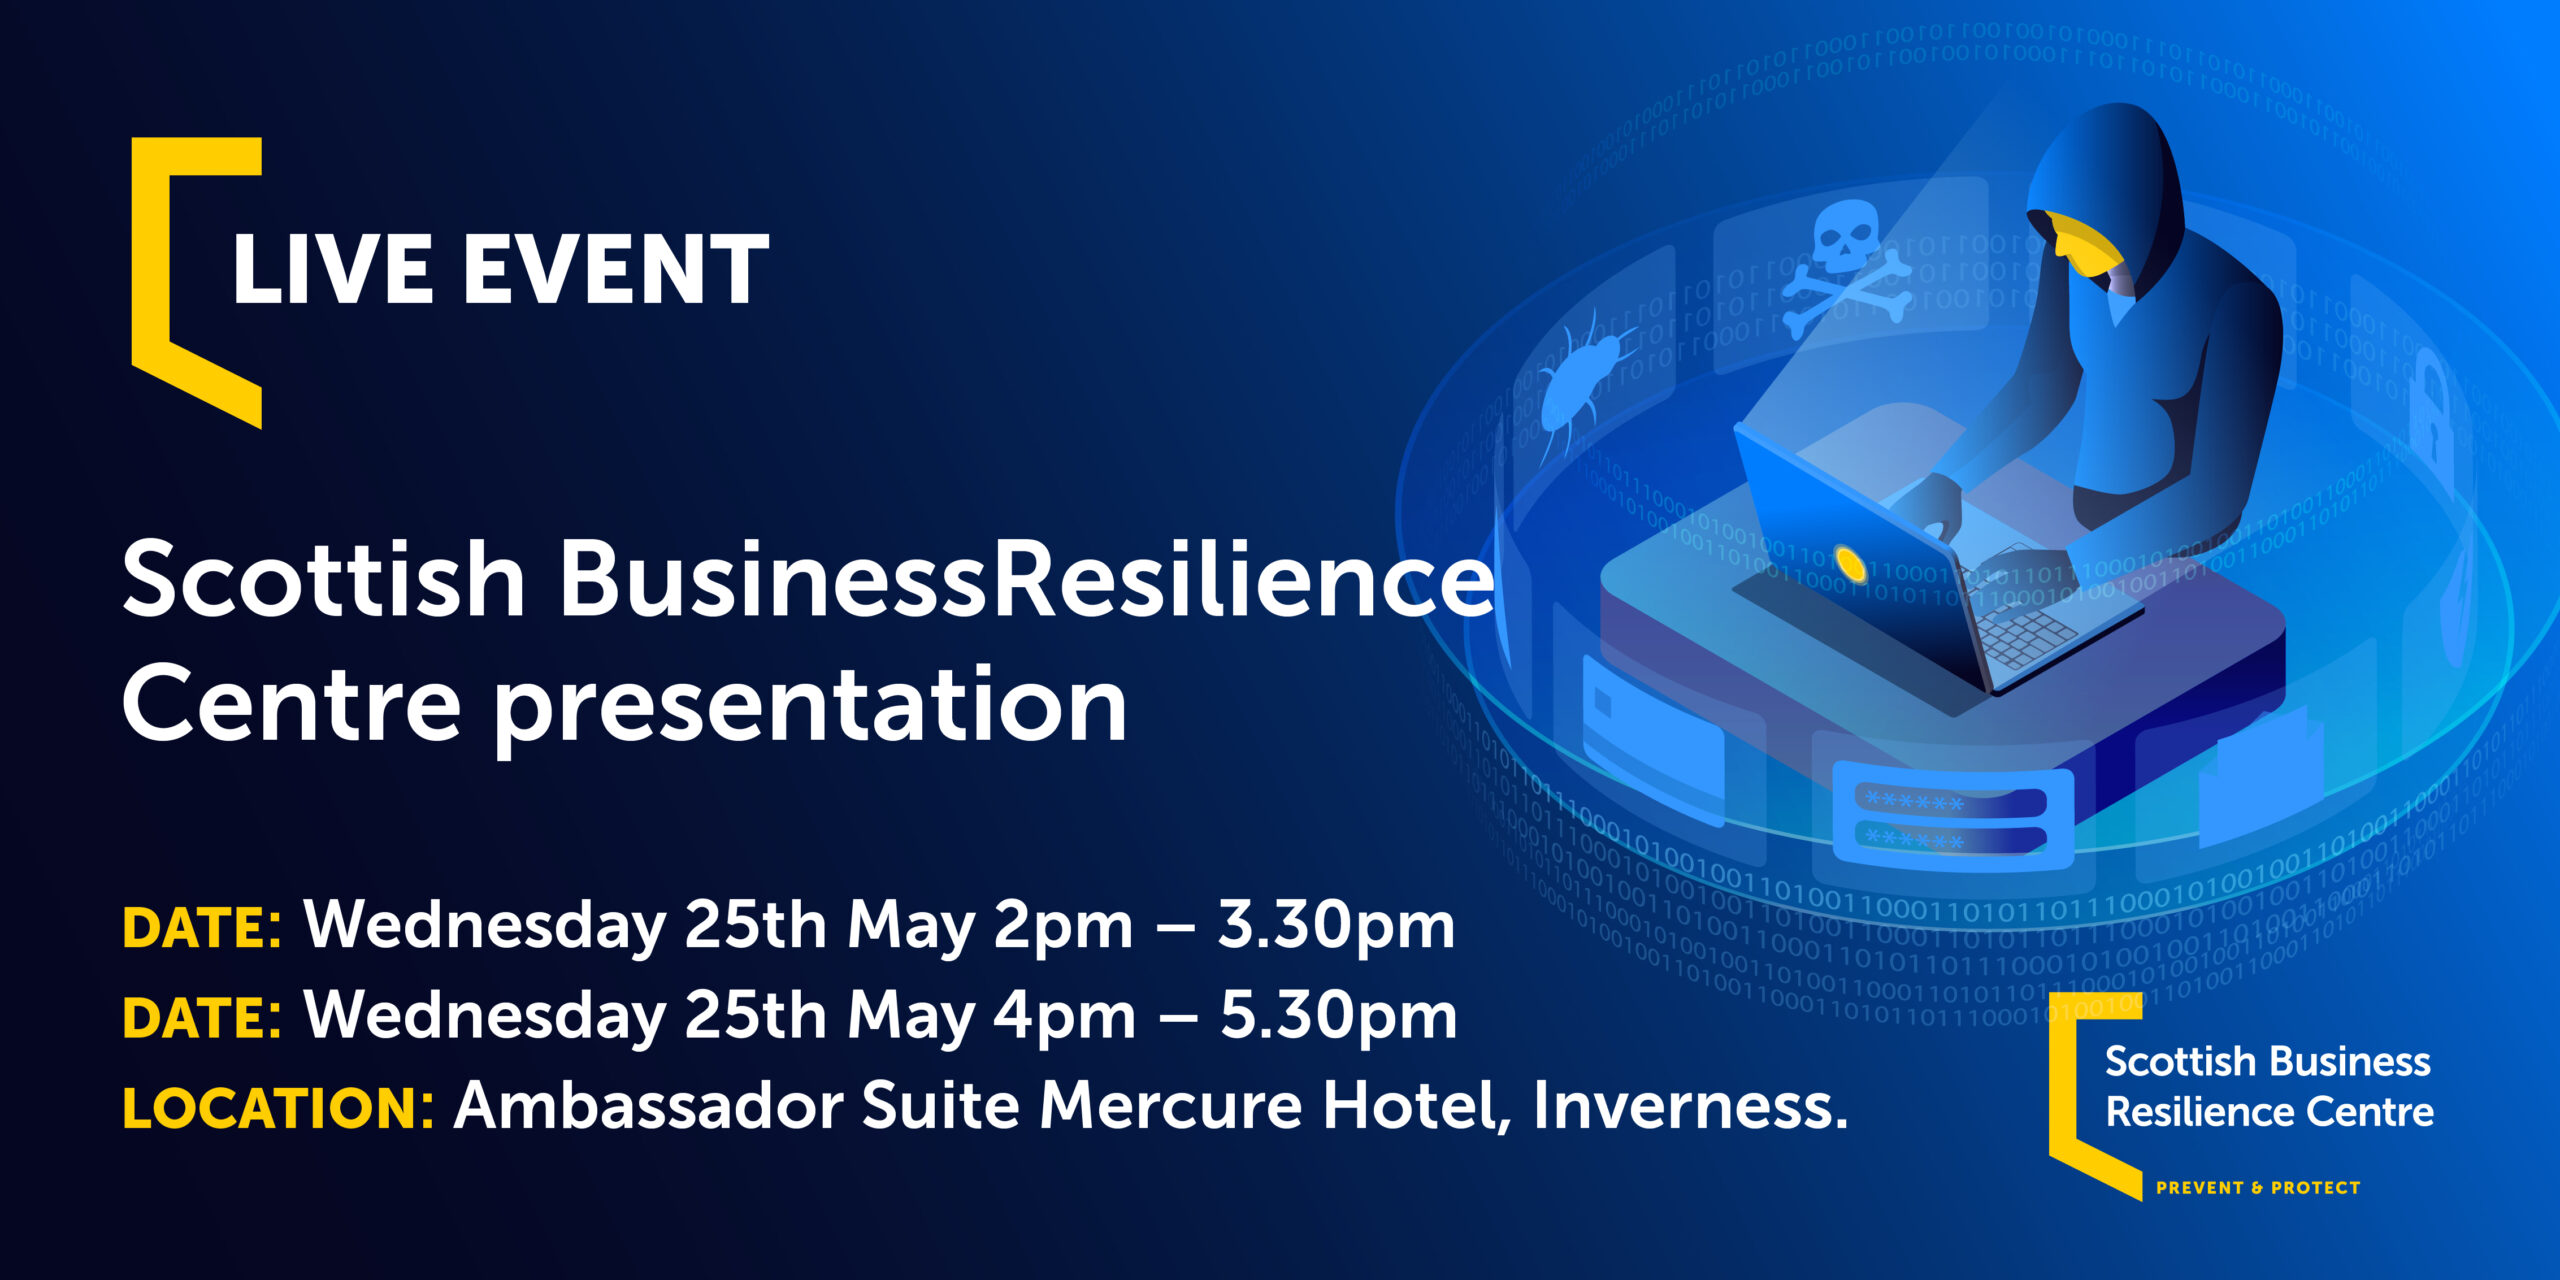 Scottish Business Resilience Centre Presentations for Businesses 24-26 May